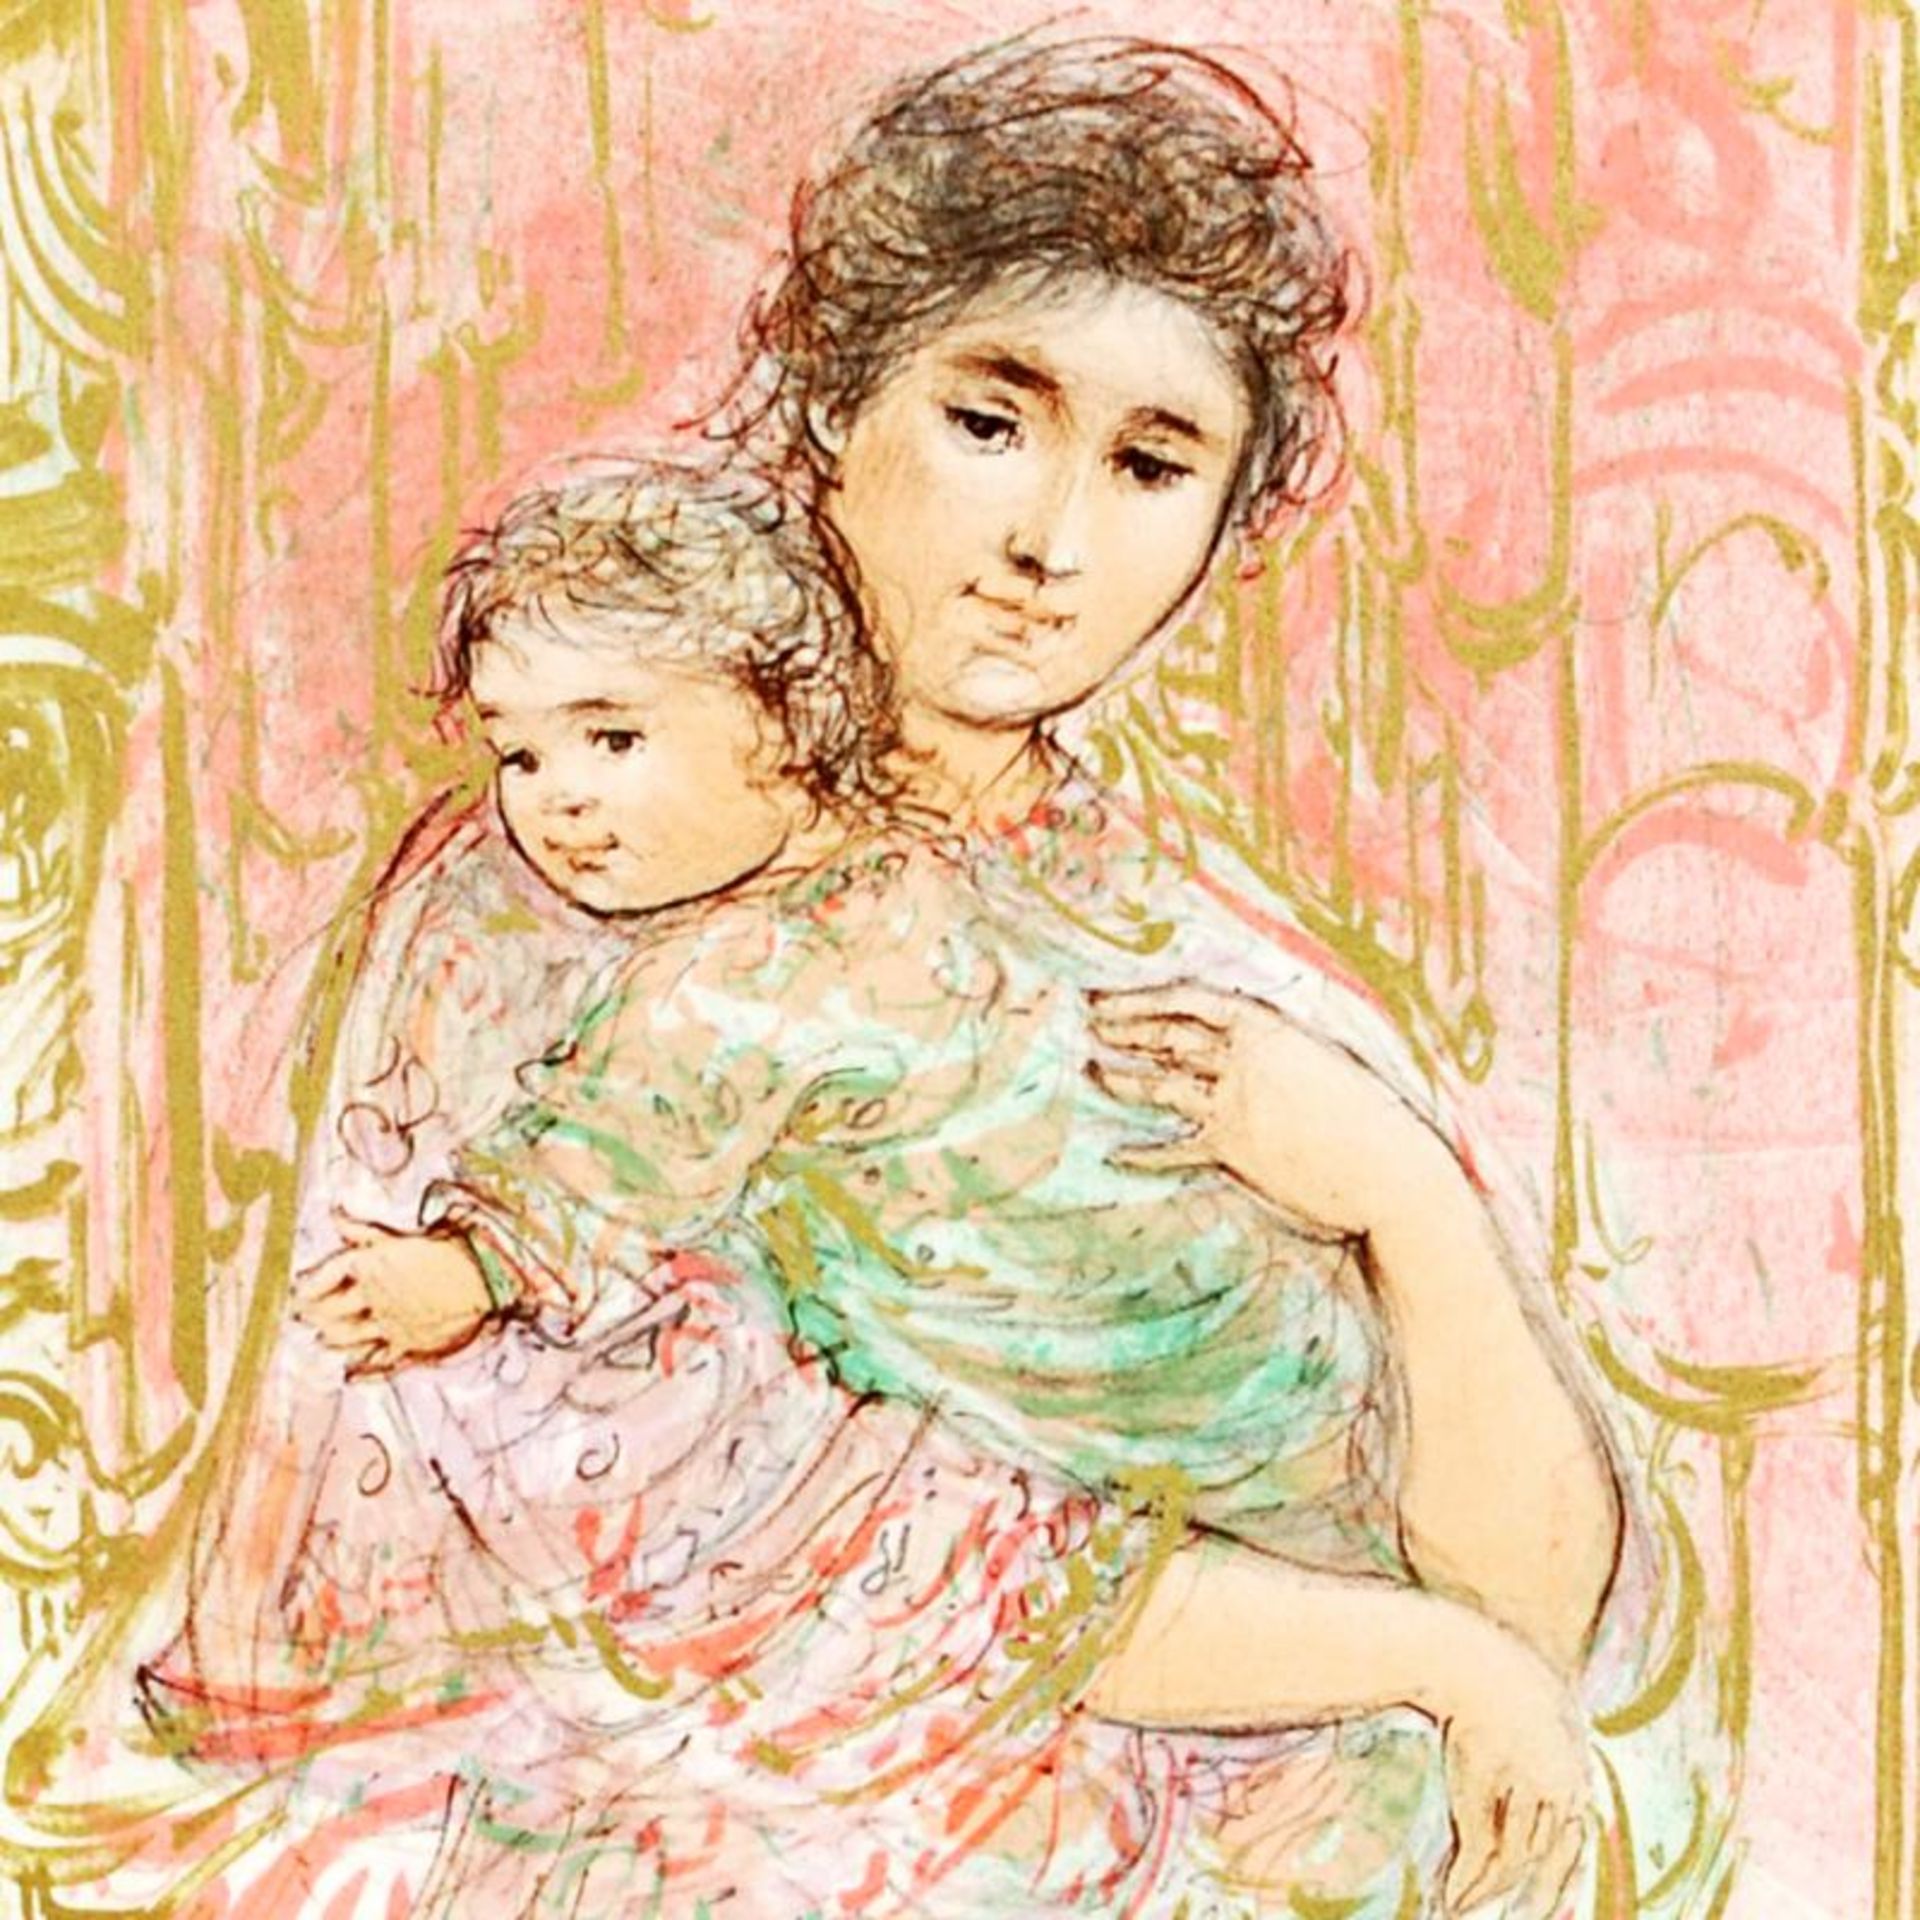 Willa And Child by Hibel (1917-2014) - Image 2 of 2